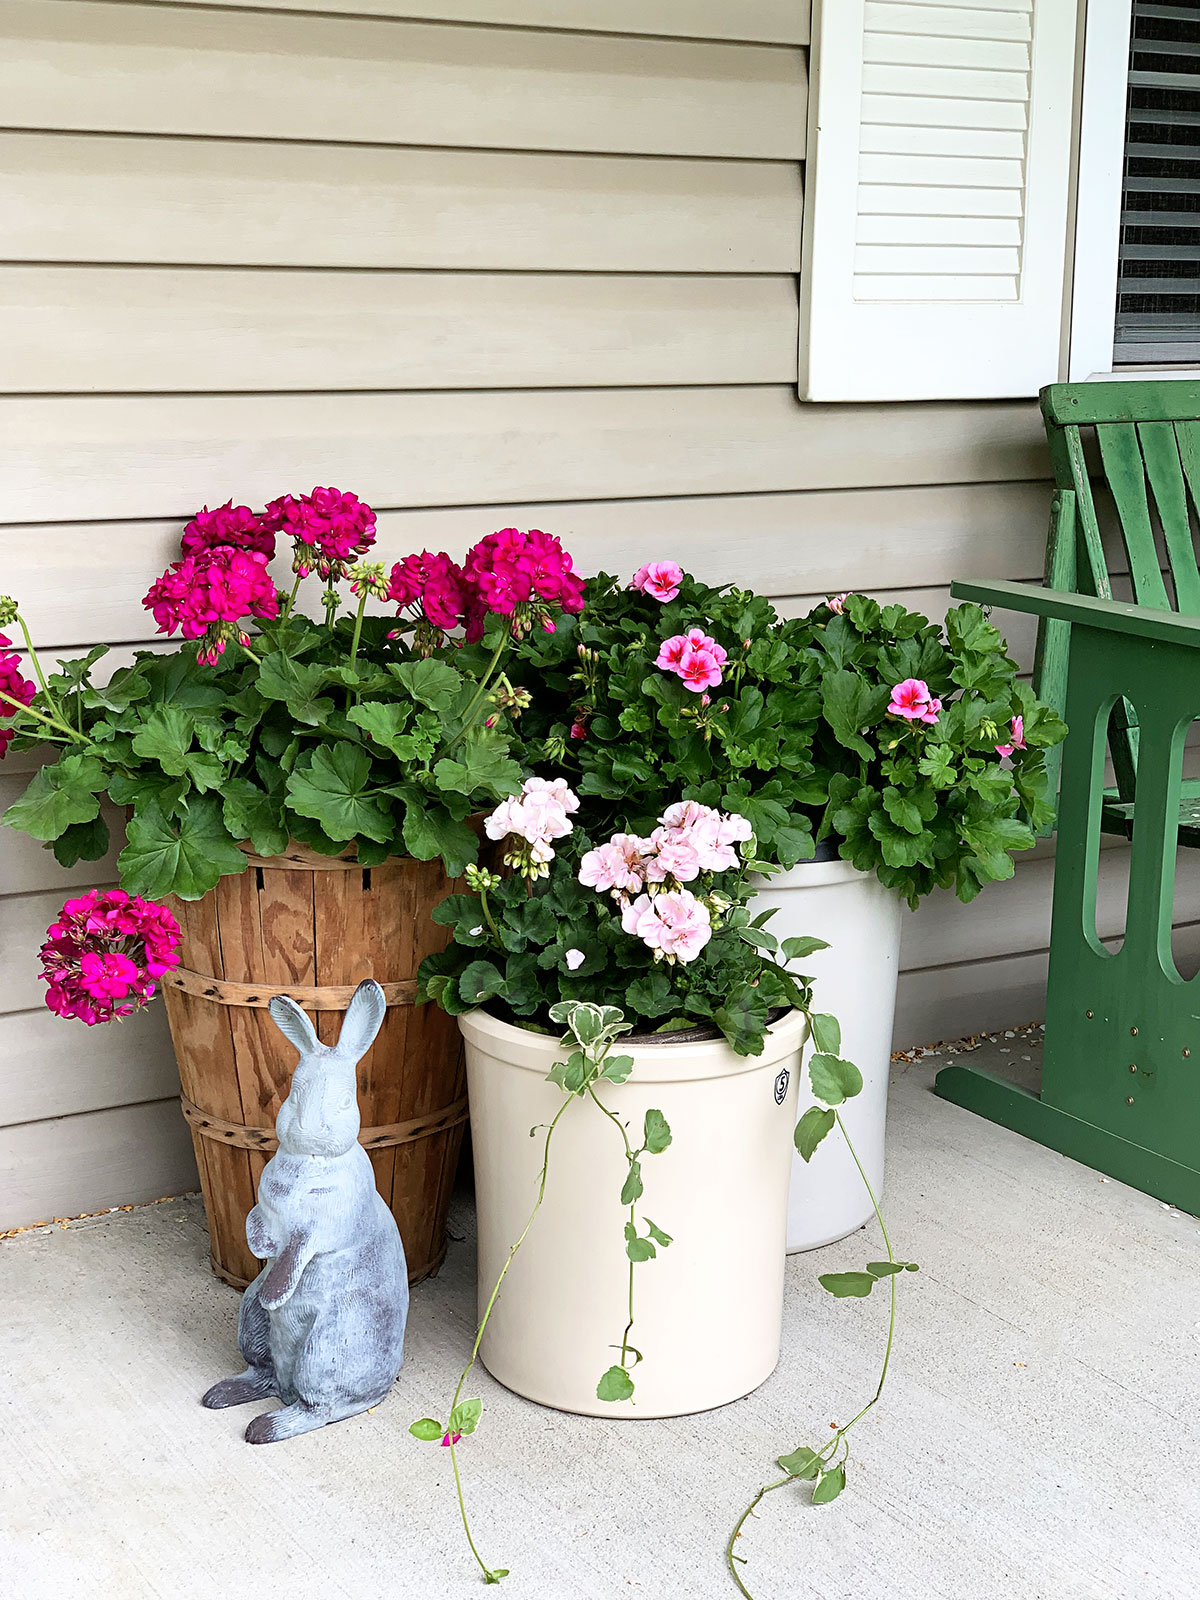 Pink geraniums in crocks and peach basket on the porch.